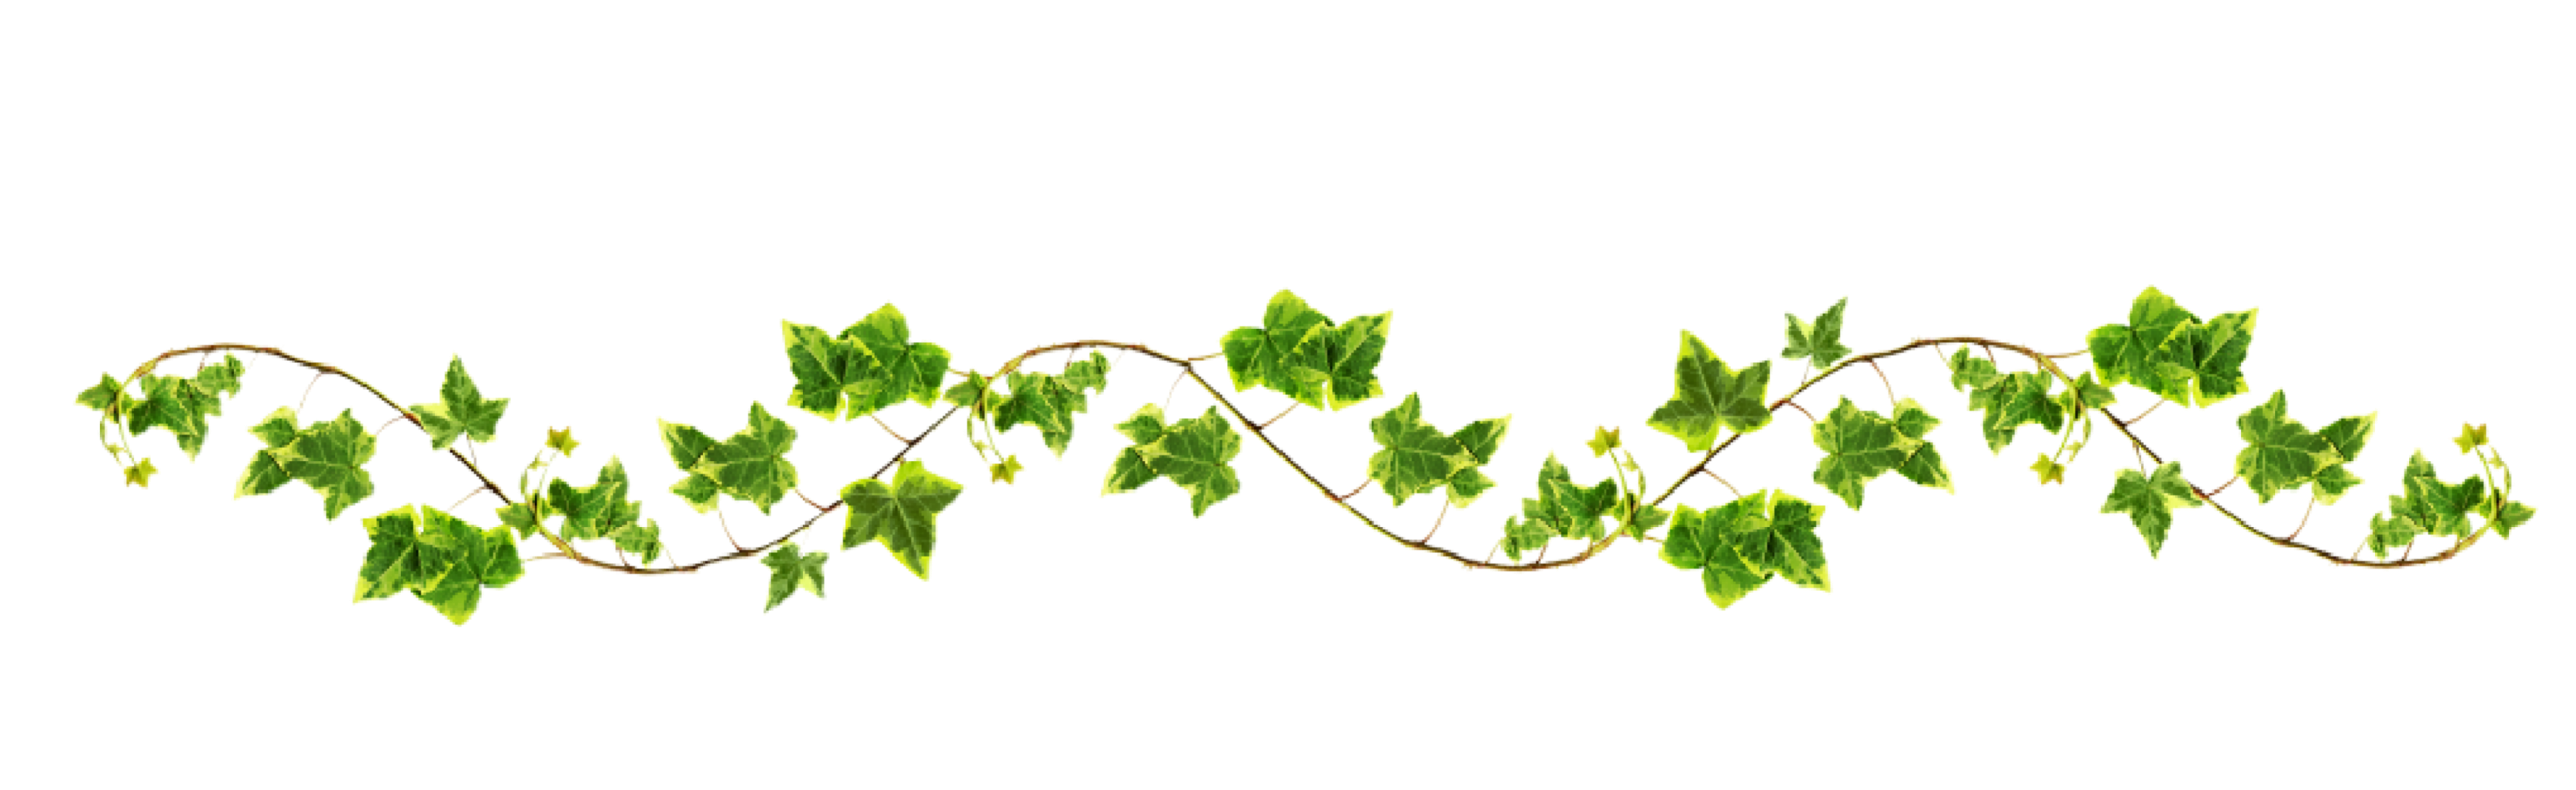 This visual is about ivy vines leaves plants scenery freetoedit #ivy #vines...